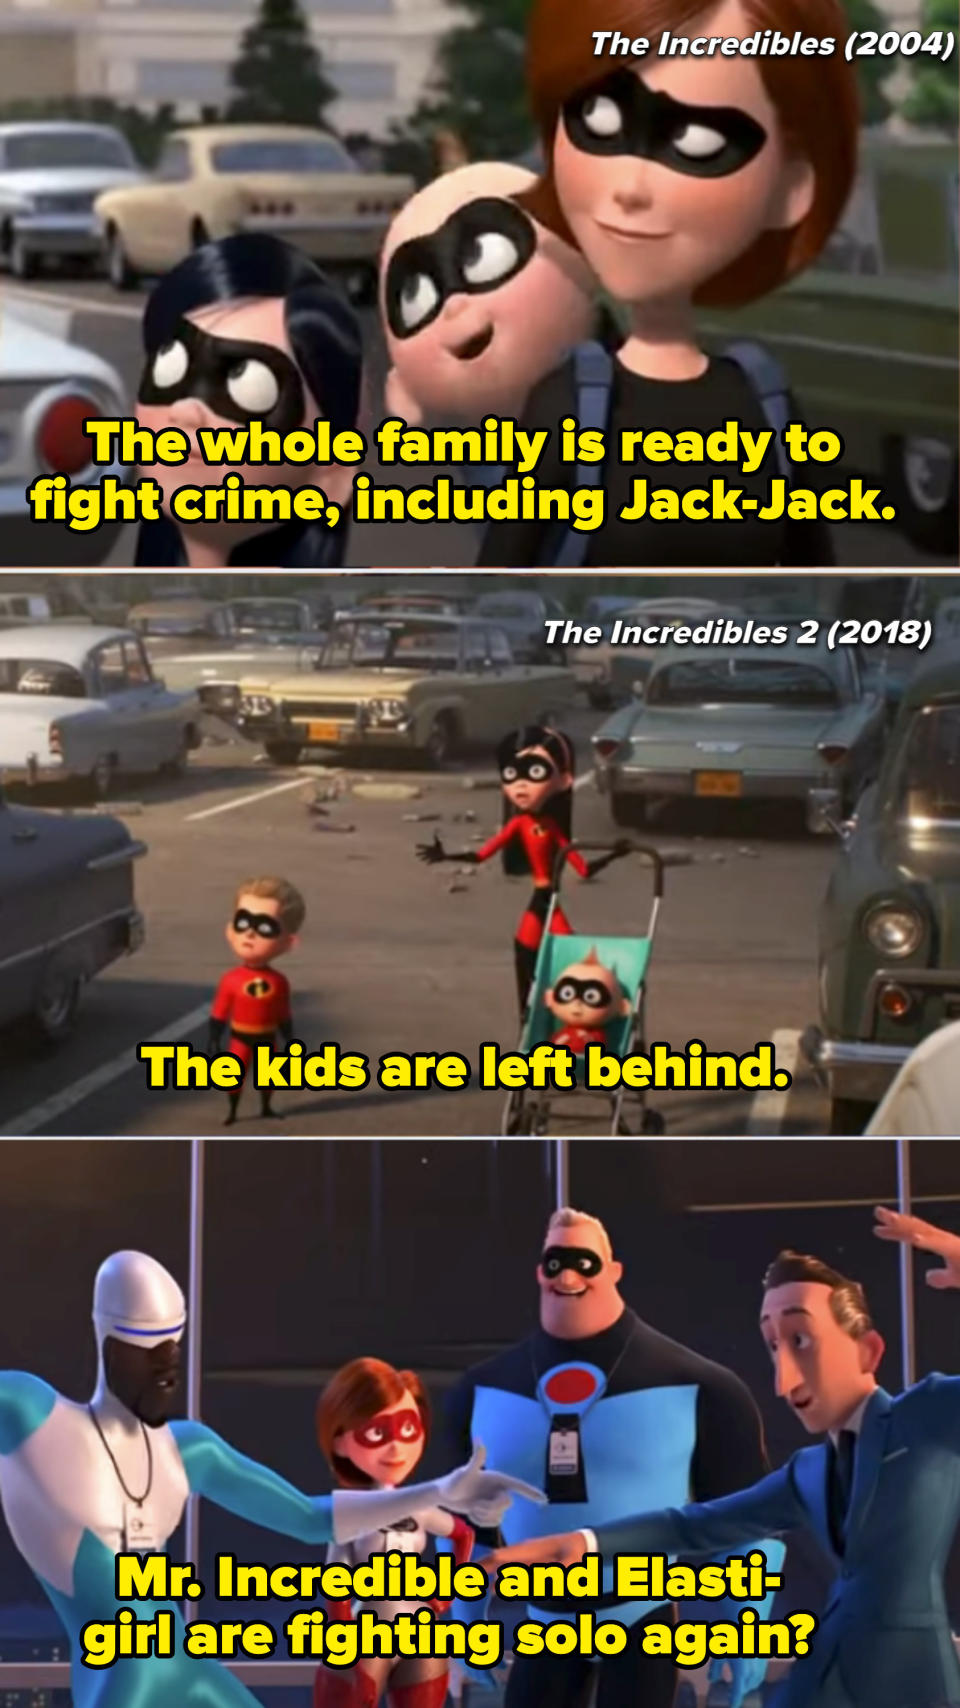 Screenshots from "Incredibles 2"